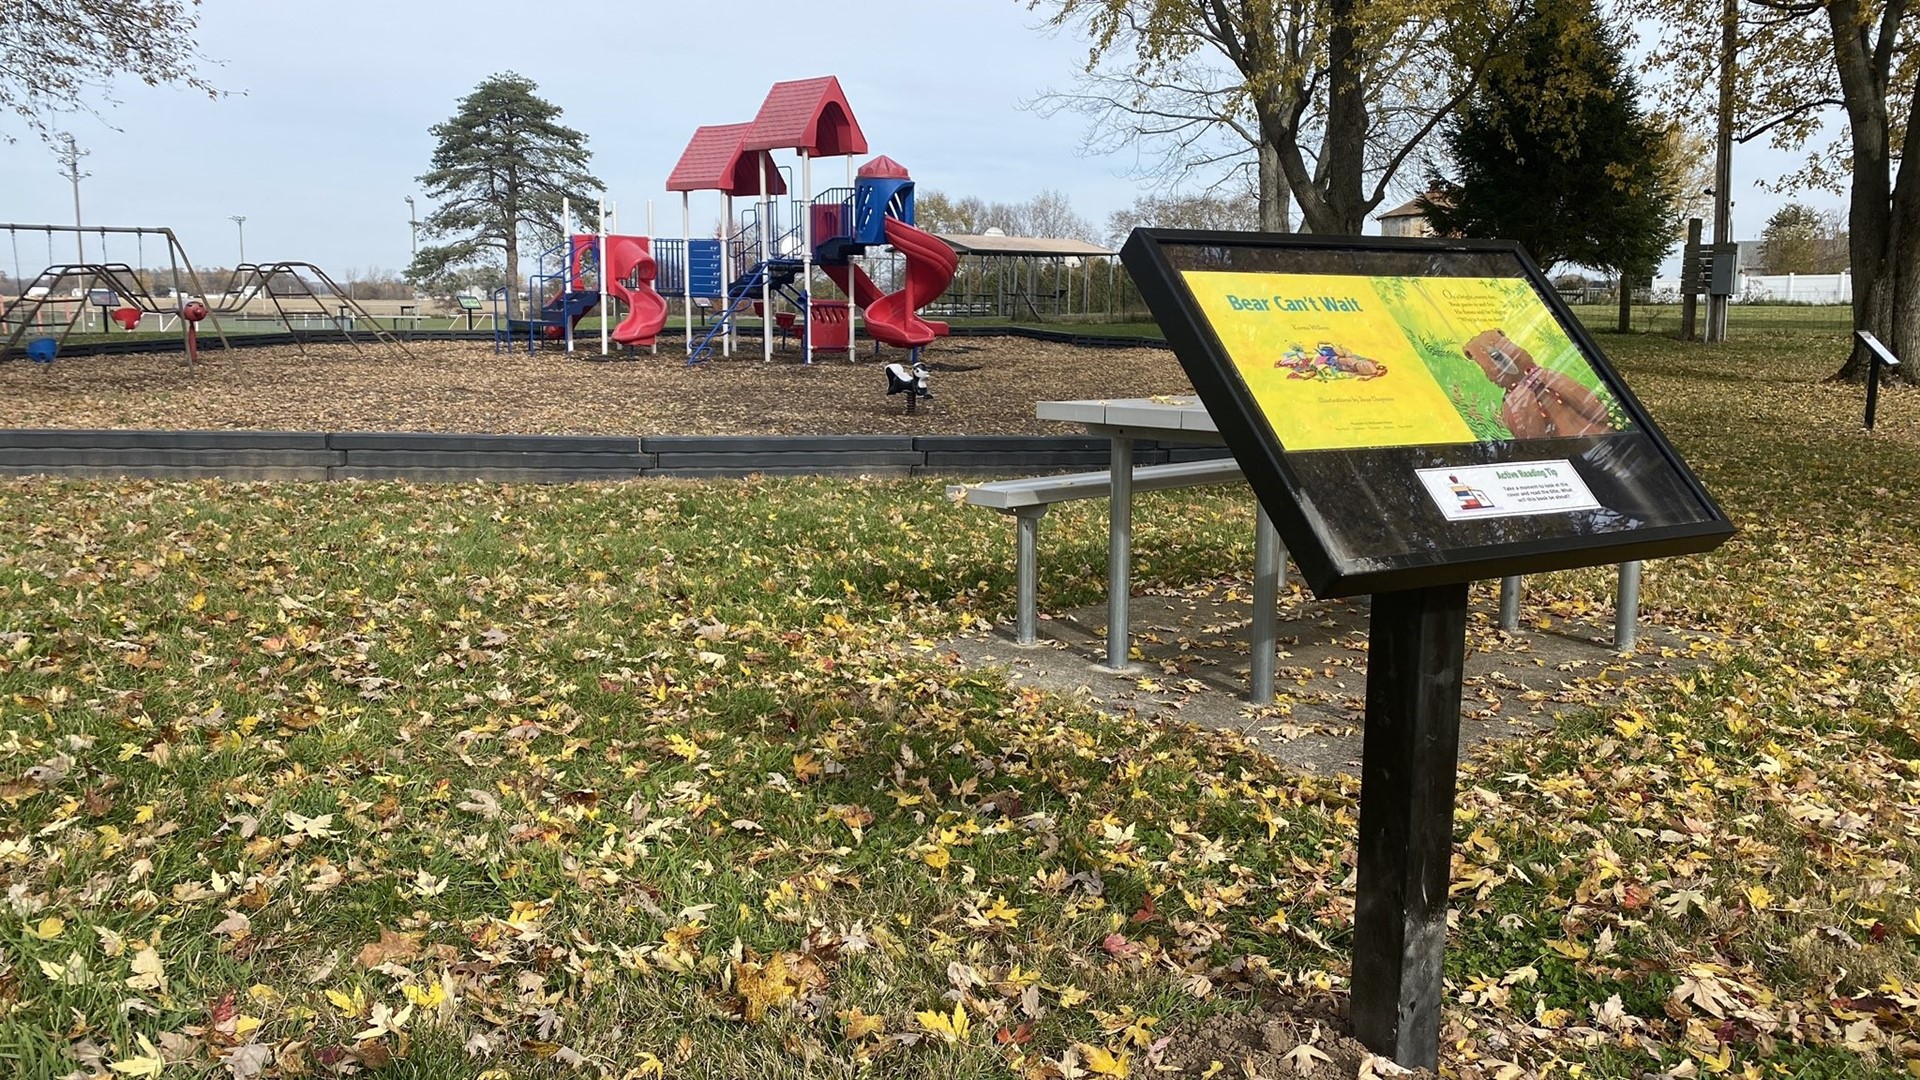 The Findlay-Hancock County Public Library has now built two StoryWalks in two years, with plans for a third.